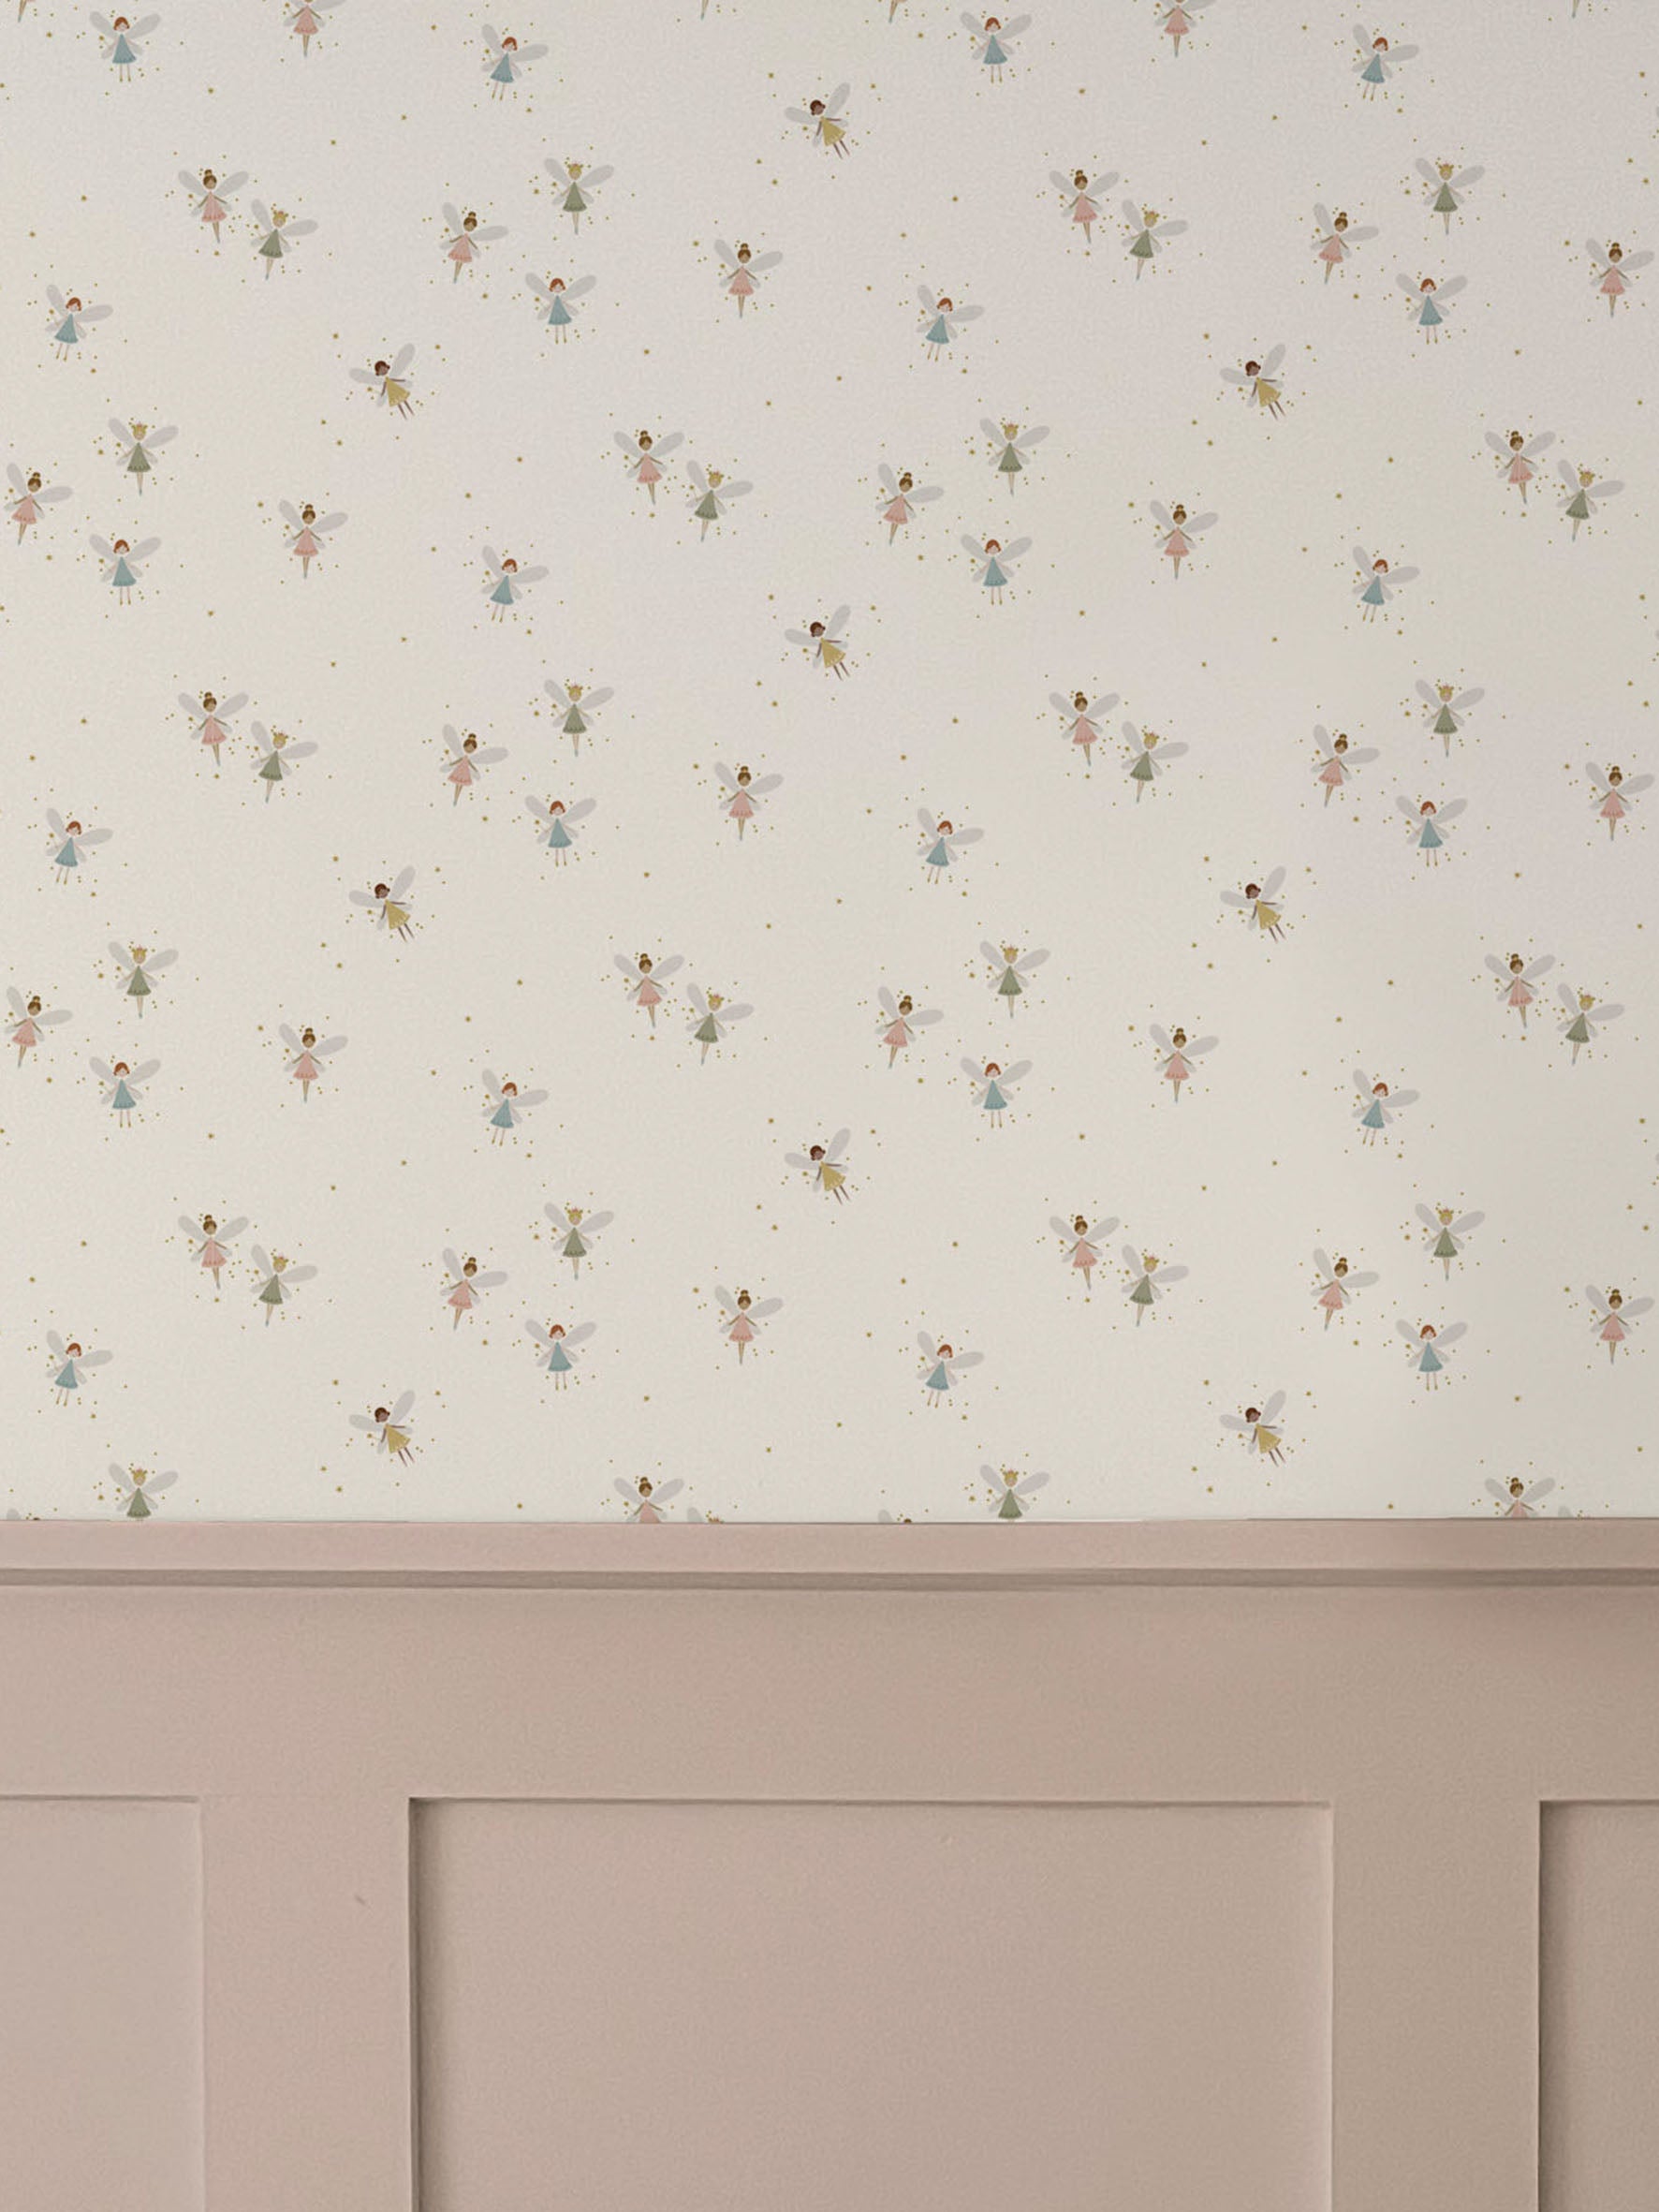 Fairy Dust Luxury Children's wallpaper above dusty pink wall panelling